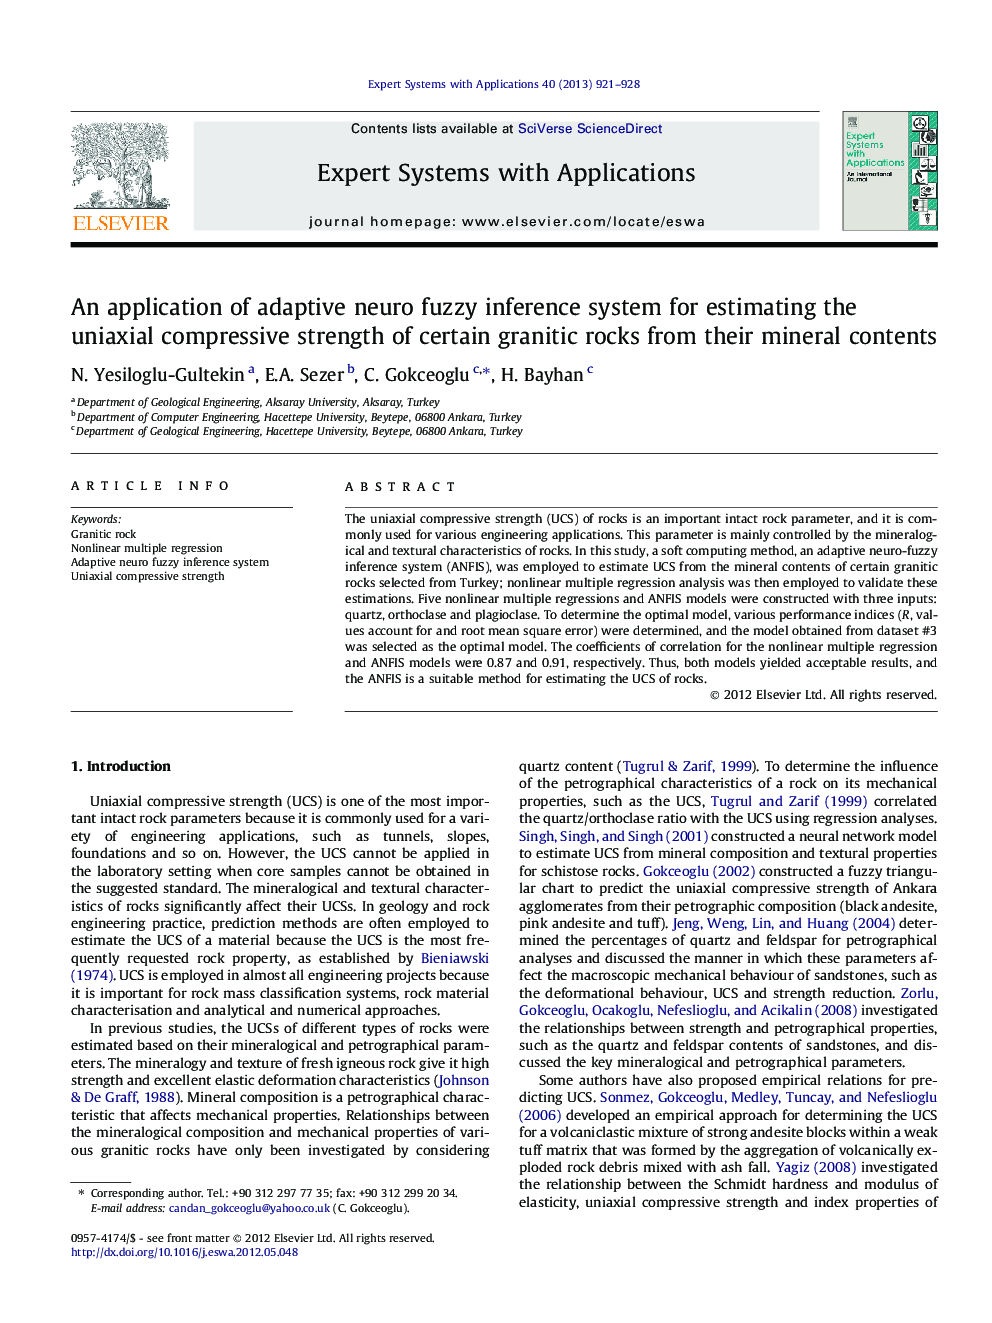 An application of adaptive neuro fuzzy inference system for estimating the uniaxial compressive strength of certain granitic rocks from their mineral contents